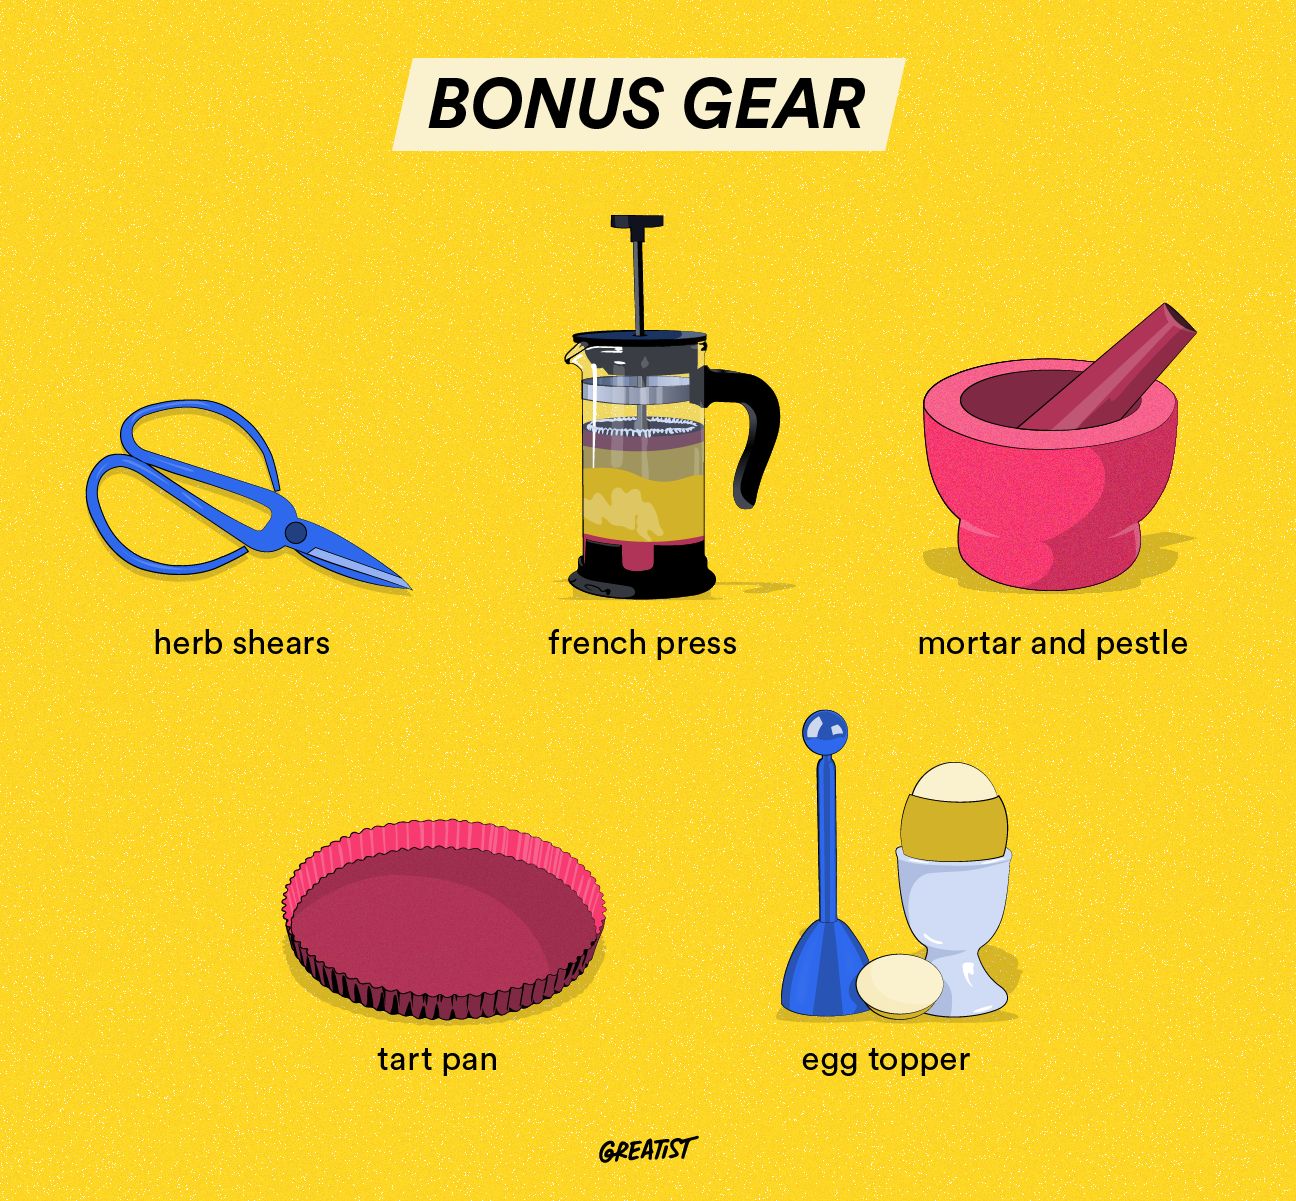 https://media.post.rvohealth.io/wp-content/uploads/sites/2/2020/11/162799-We-Oui-A-Starter-Guide-to-French-Kitchen-Essentials-1296x1201-Bonus-Gear-Body.png